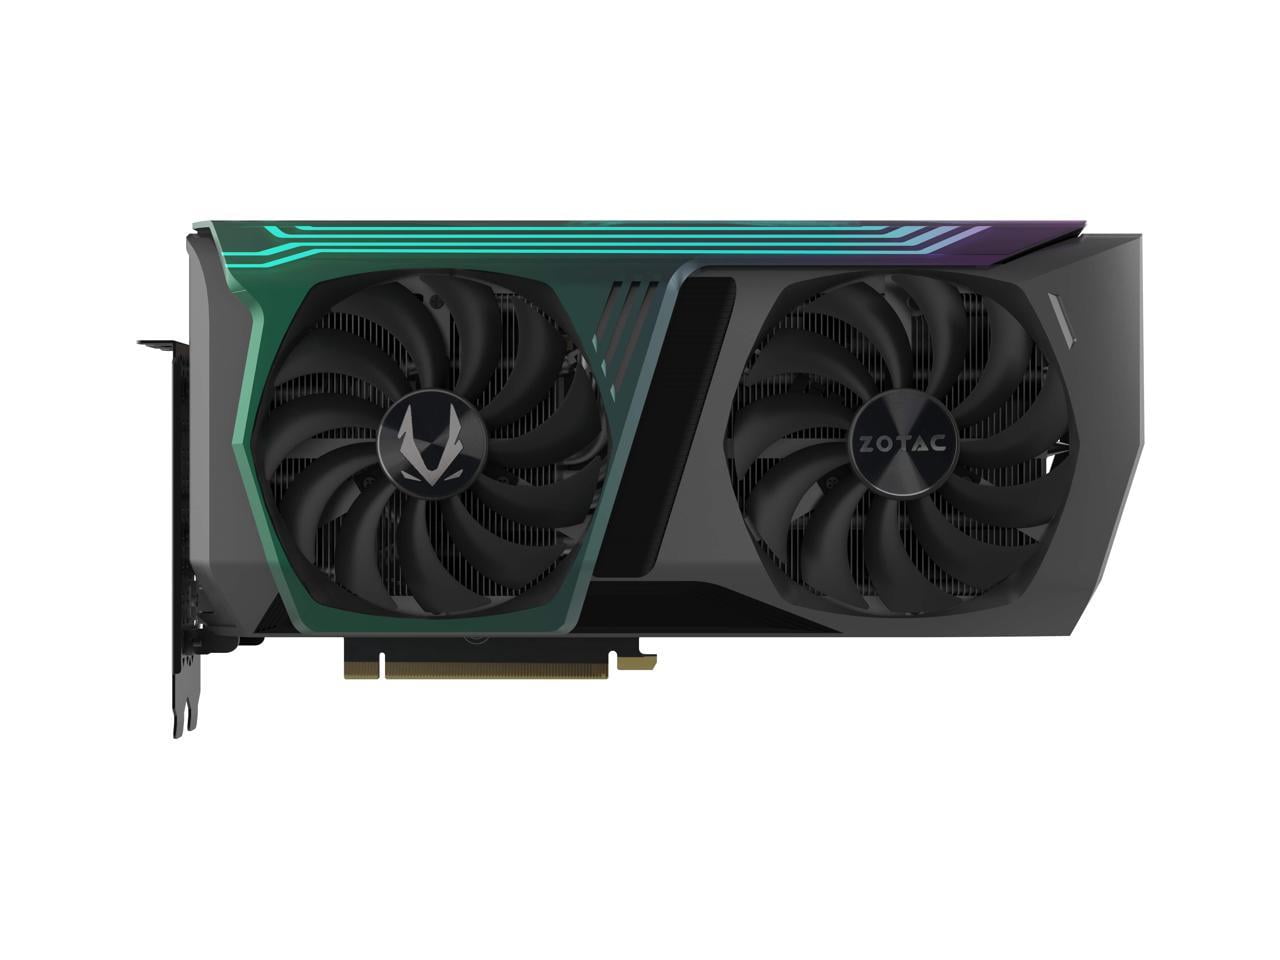 ZOTAC GAMING GeForce RTX 3070 AMP Holo LHR 8GB GDDR6 256-bit 14 Gbps PCIE  4.0 Gaming Graphics Card, HoloBlack, IceStorm 2.0 Advanced Cooling, SPECTRA 